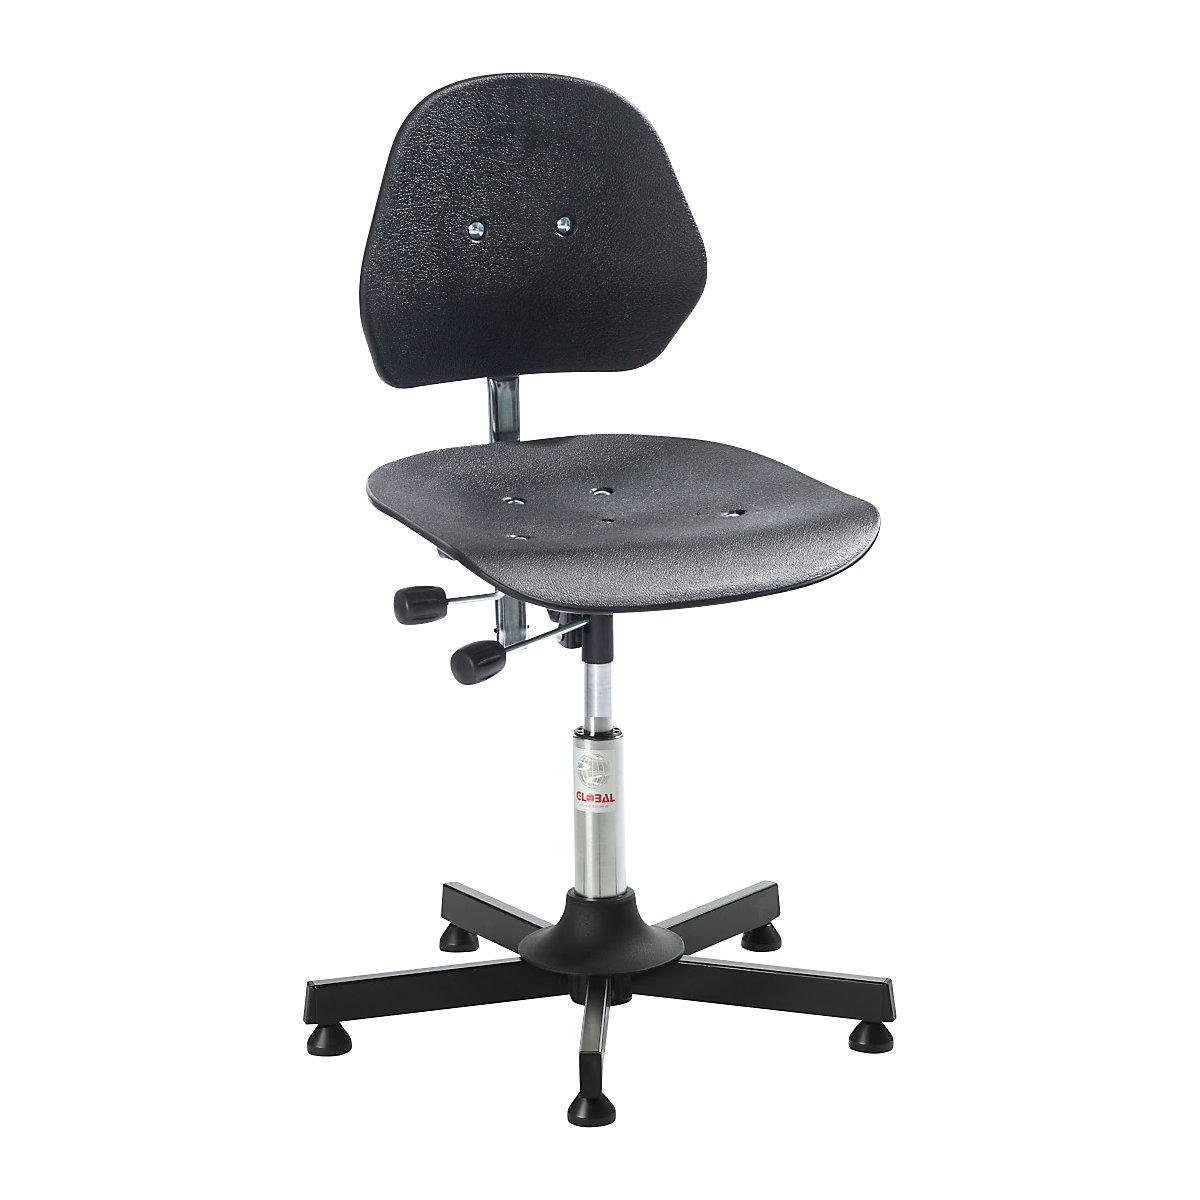 SOLID industrial swivel chair